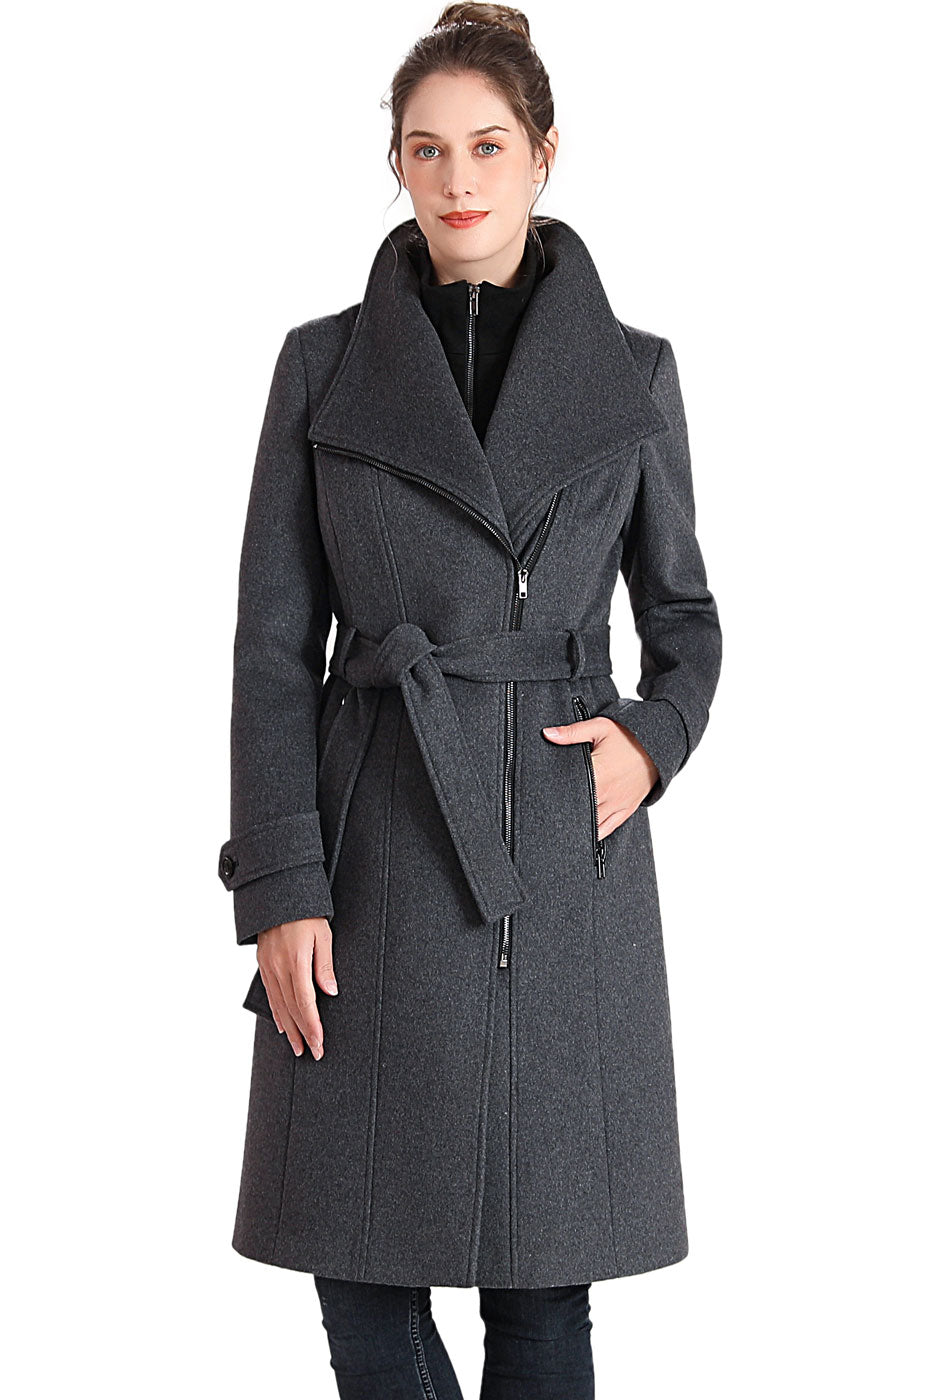 BGSD Women Mel Wool Belted Wrap Trench Coat with Removable Bib